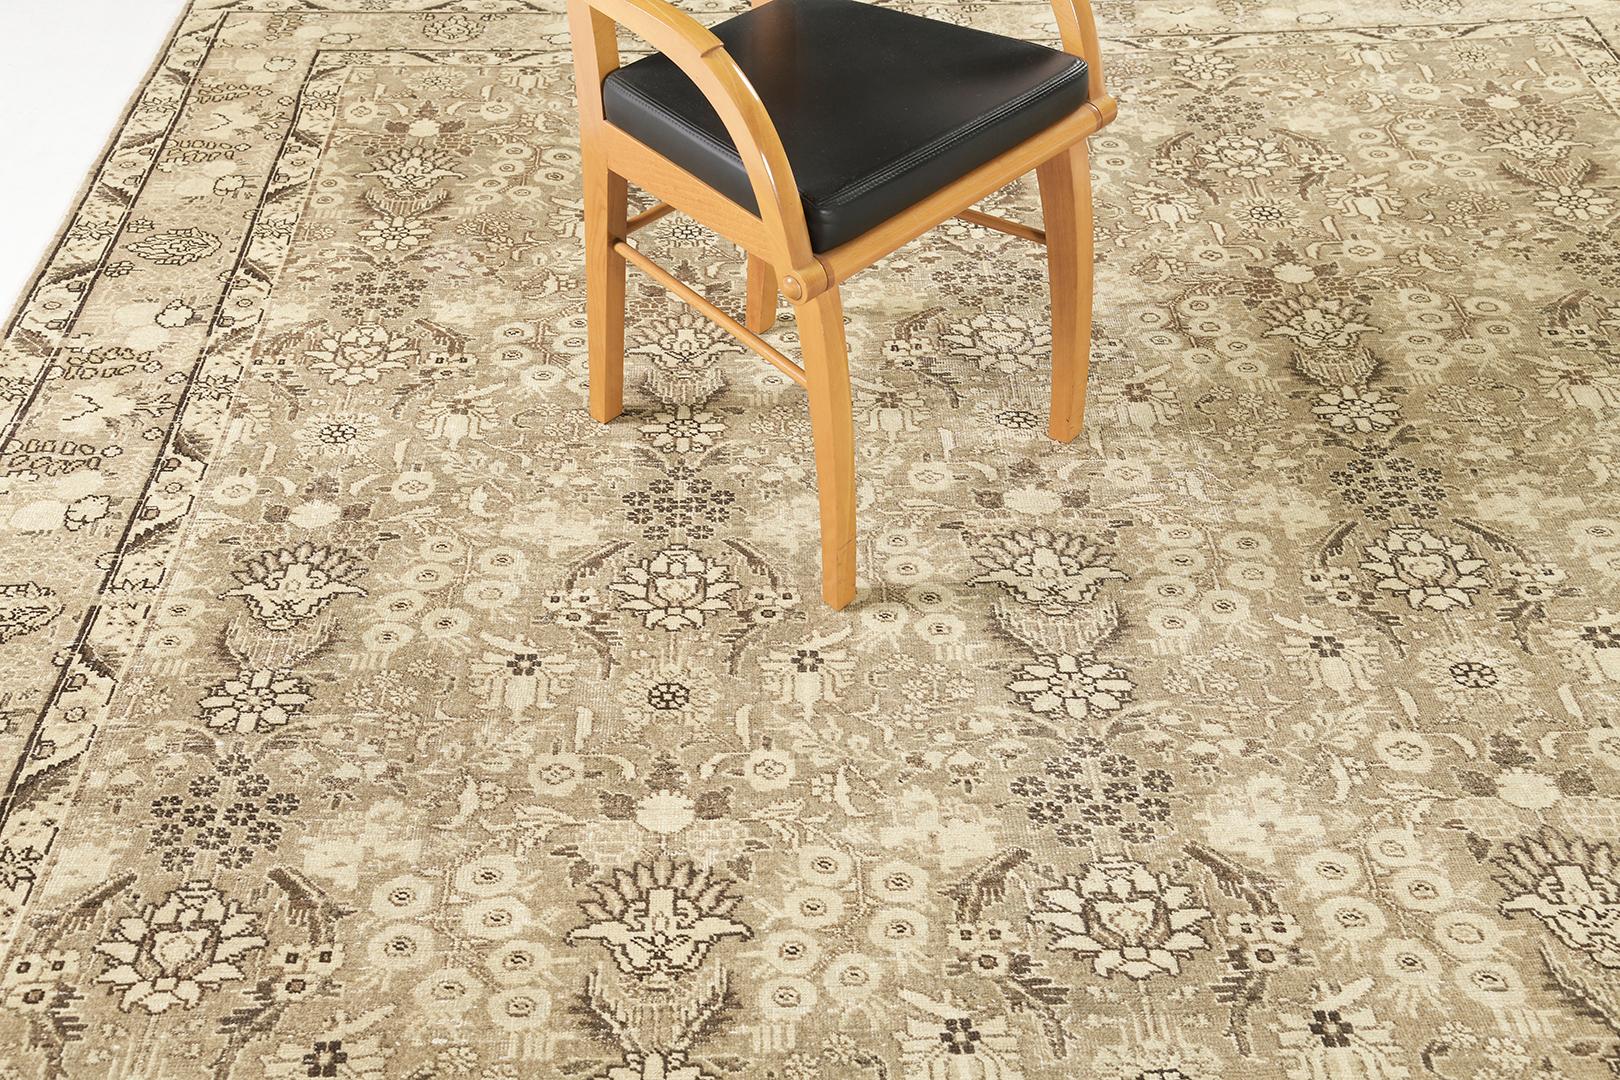 This timeless Tabriz Rug features a stunning pattern in a neutral field. A magical touch of peonies, daisies, carnations from all the shades of a neutral tone, and the scrolling vinery issuing split leaves are delicately woven around the rug. A